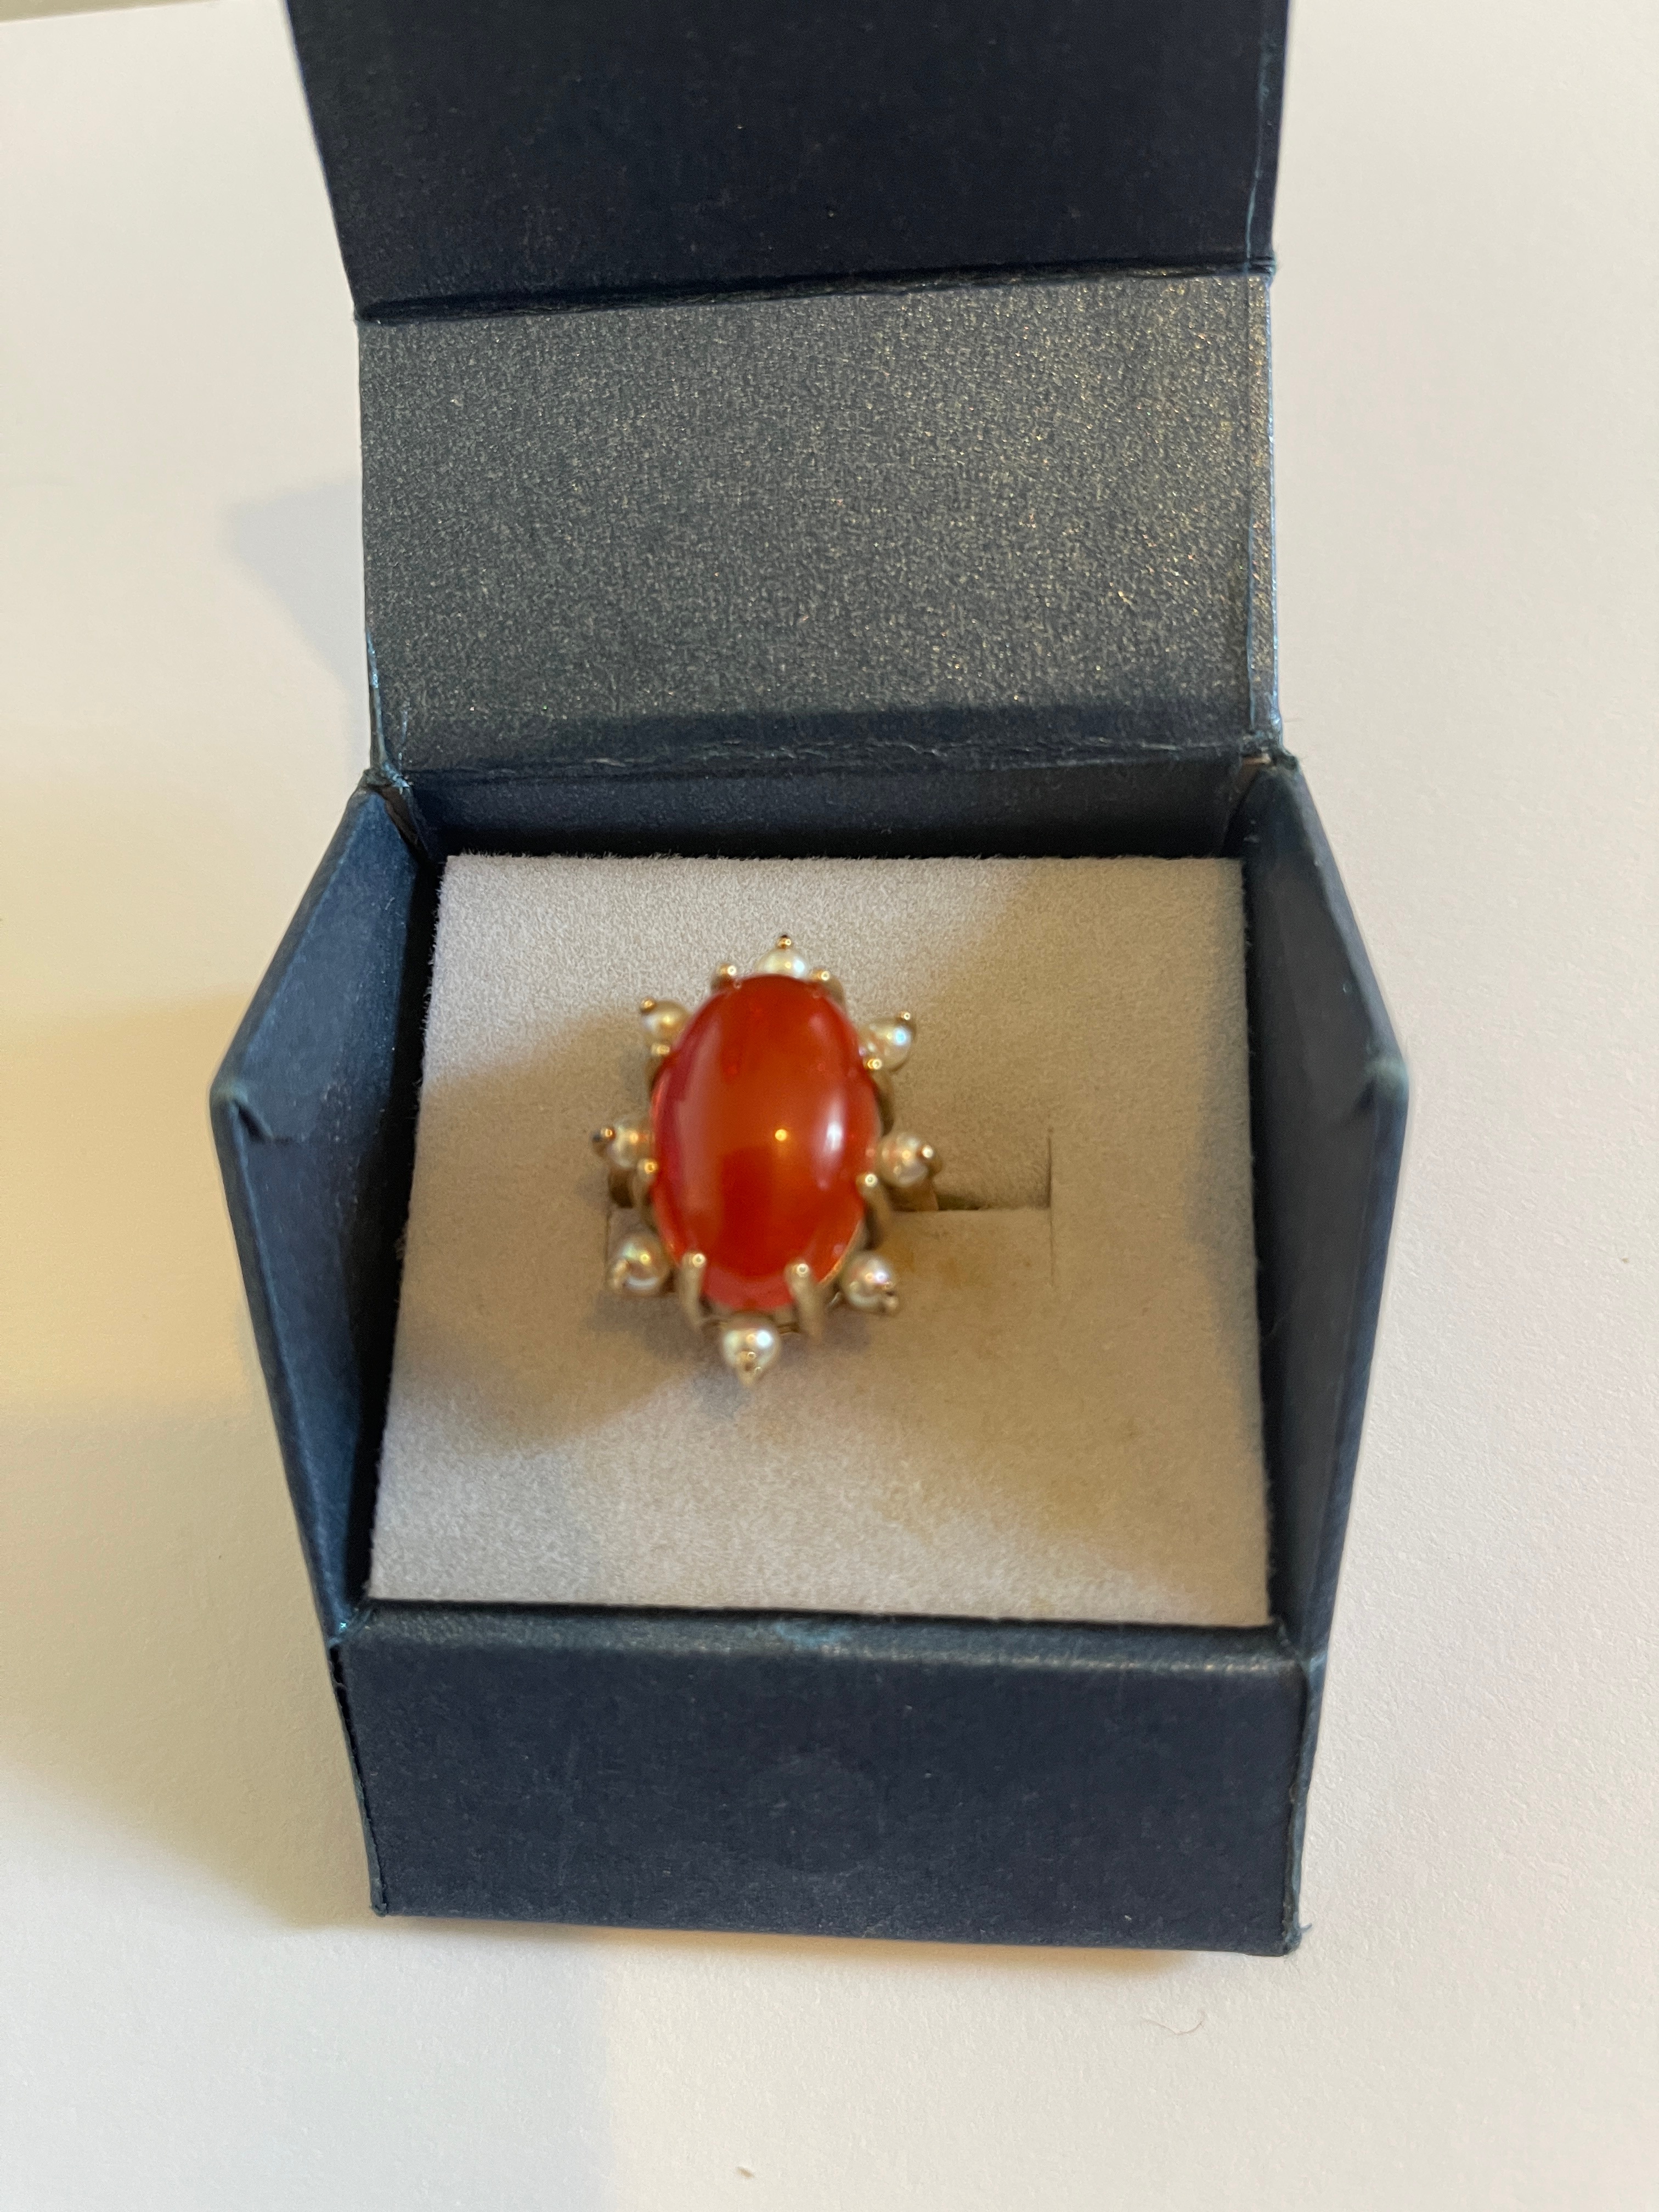 Vintage 9ct Gold, Carnelian and Pearl Ring - UK size (N 1/2) US size (7) with ring head 25x18mm - Image 4 of 7